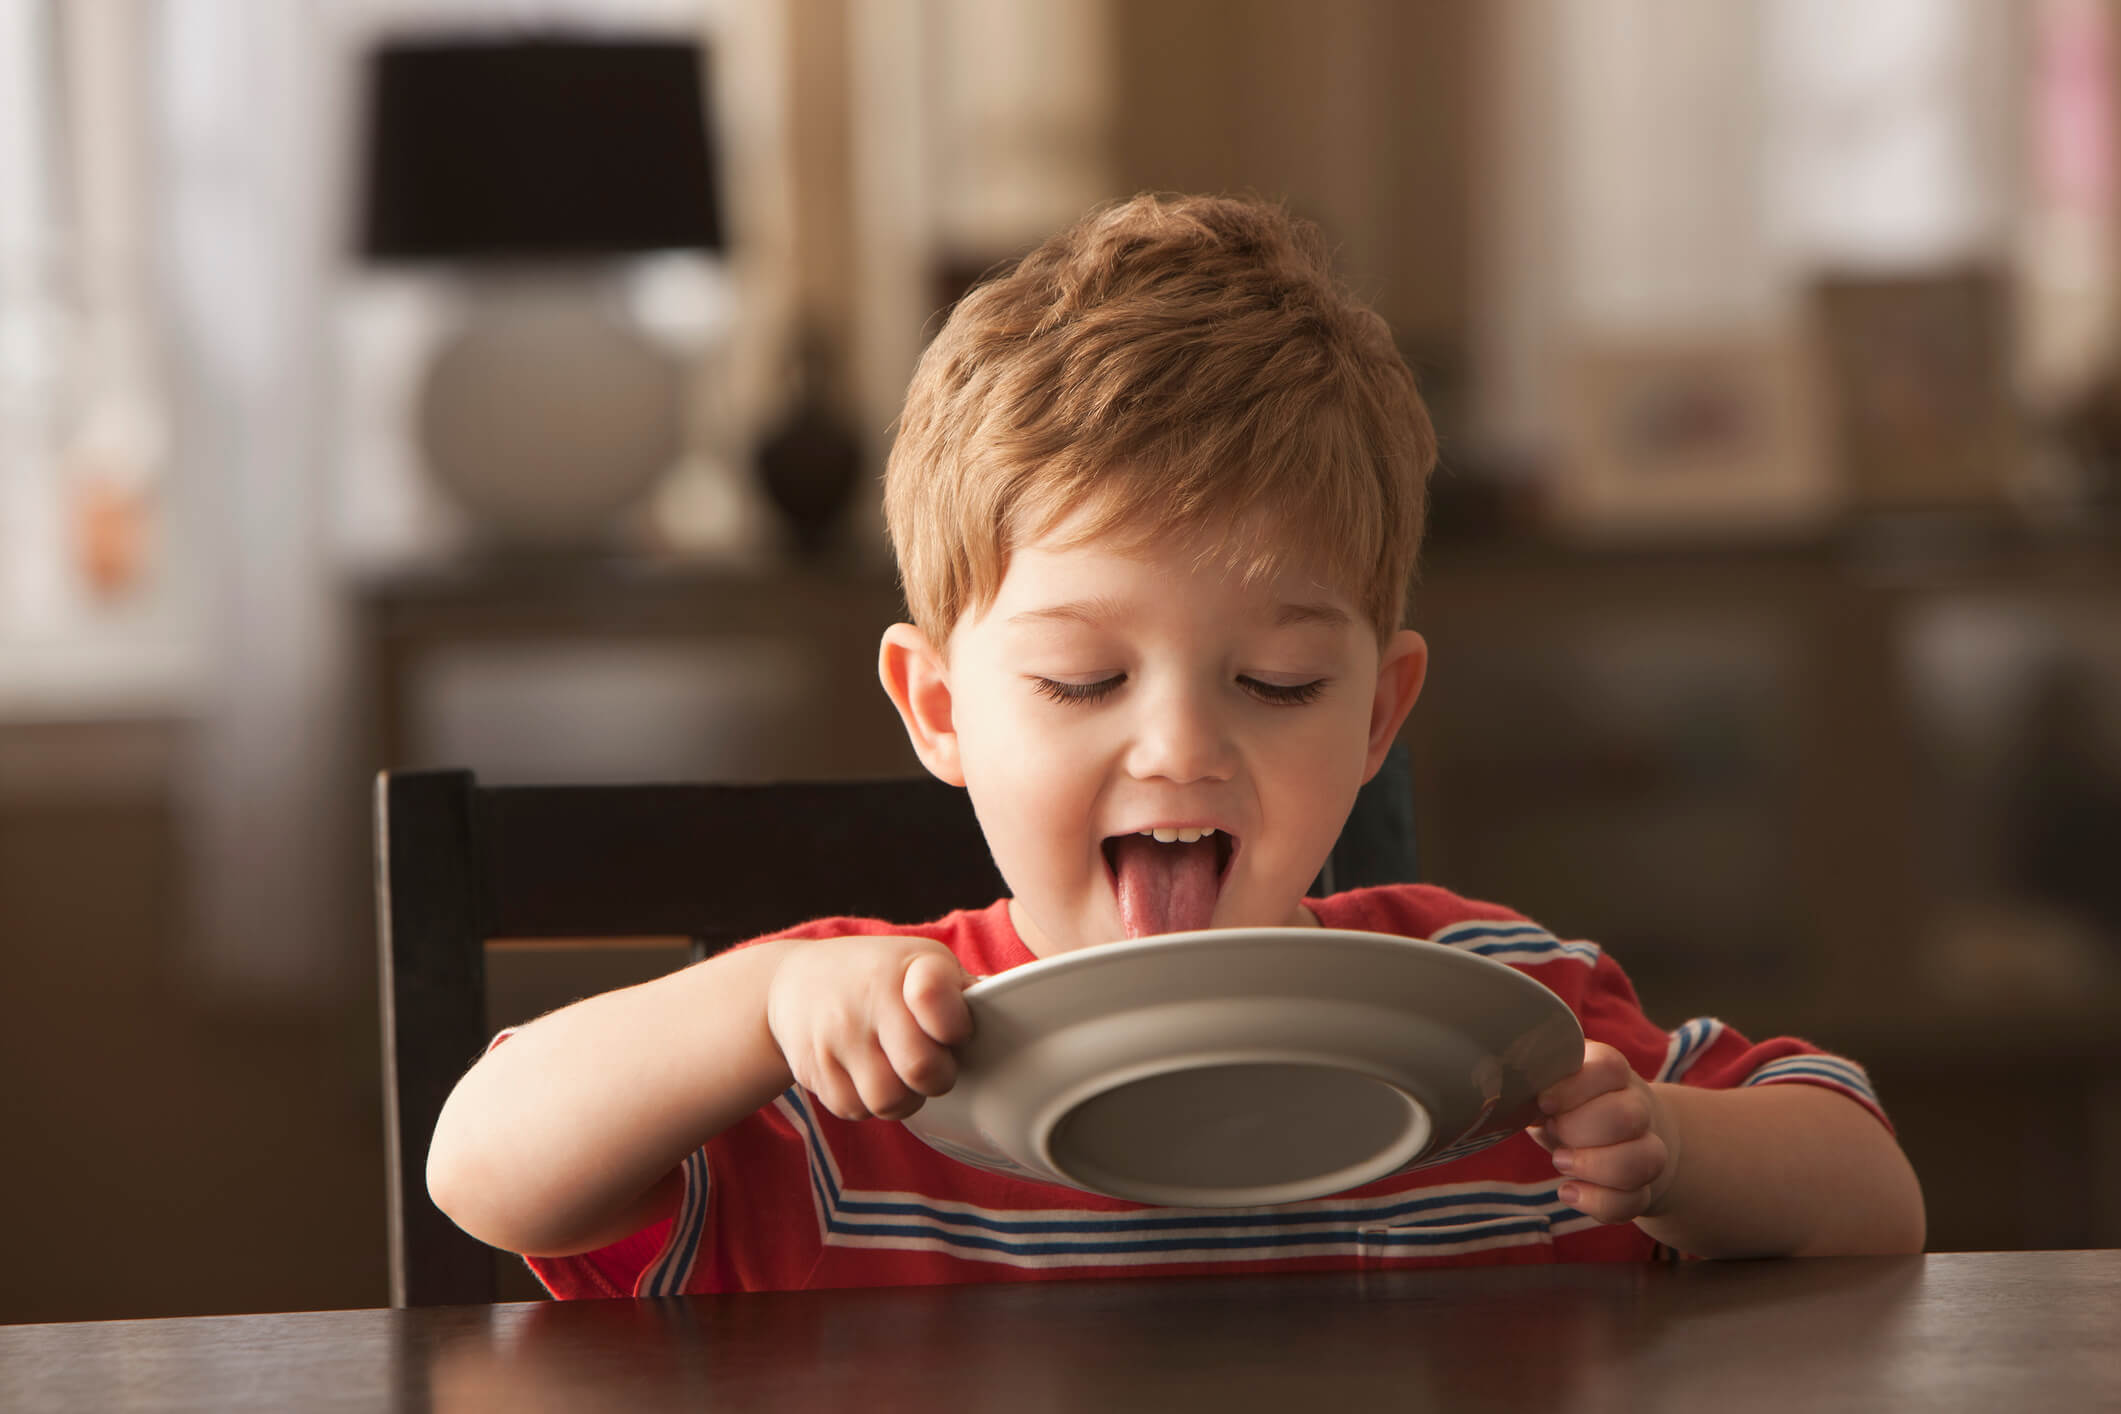 A little boy sitting at the table and licking his plate clean